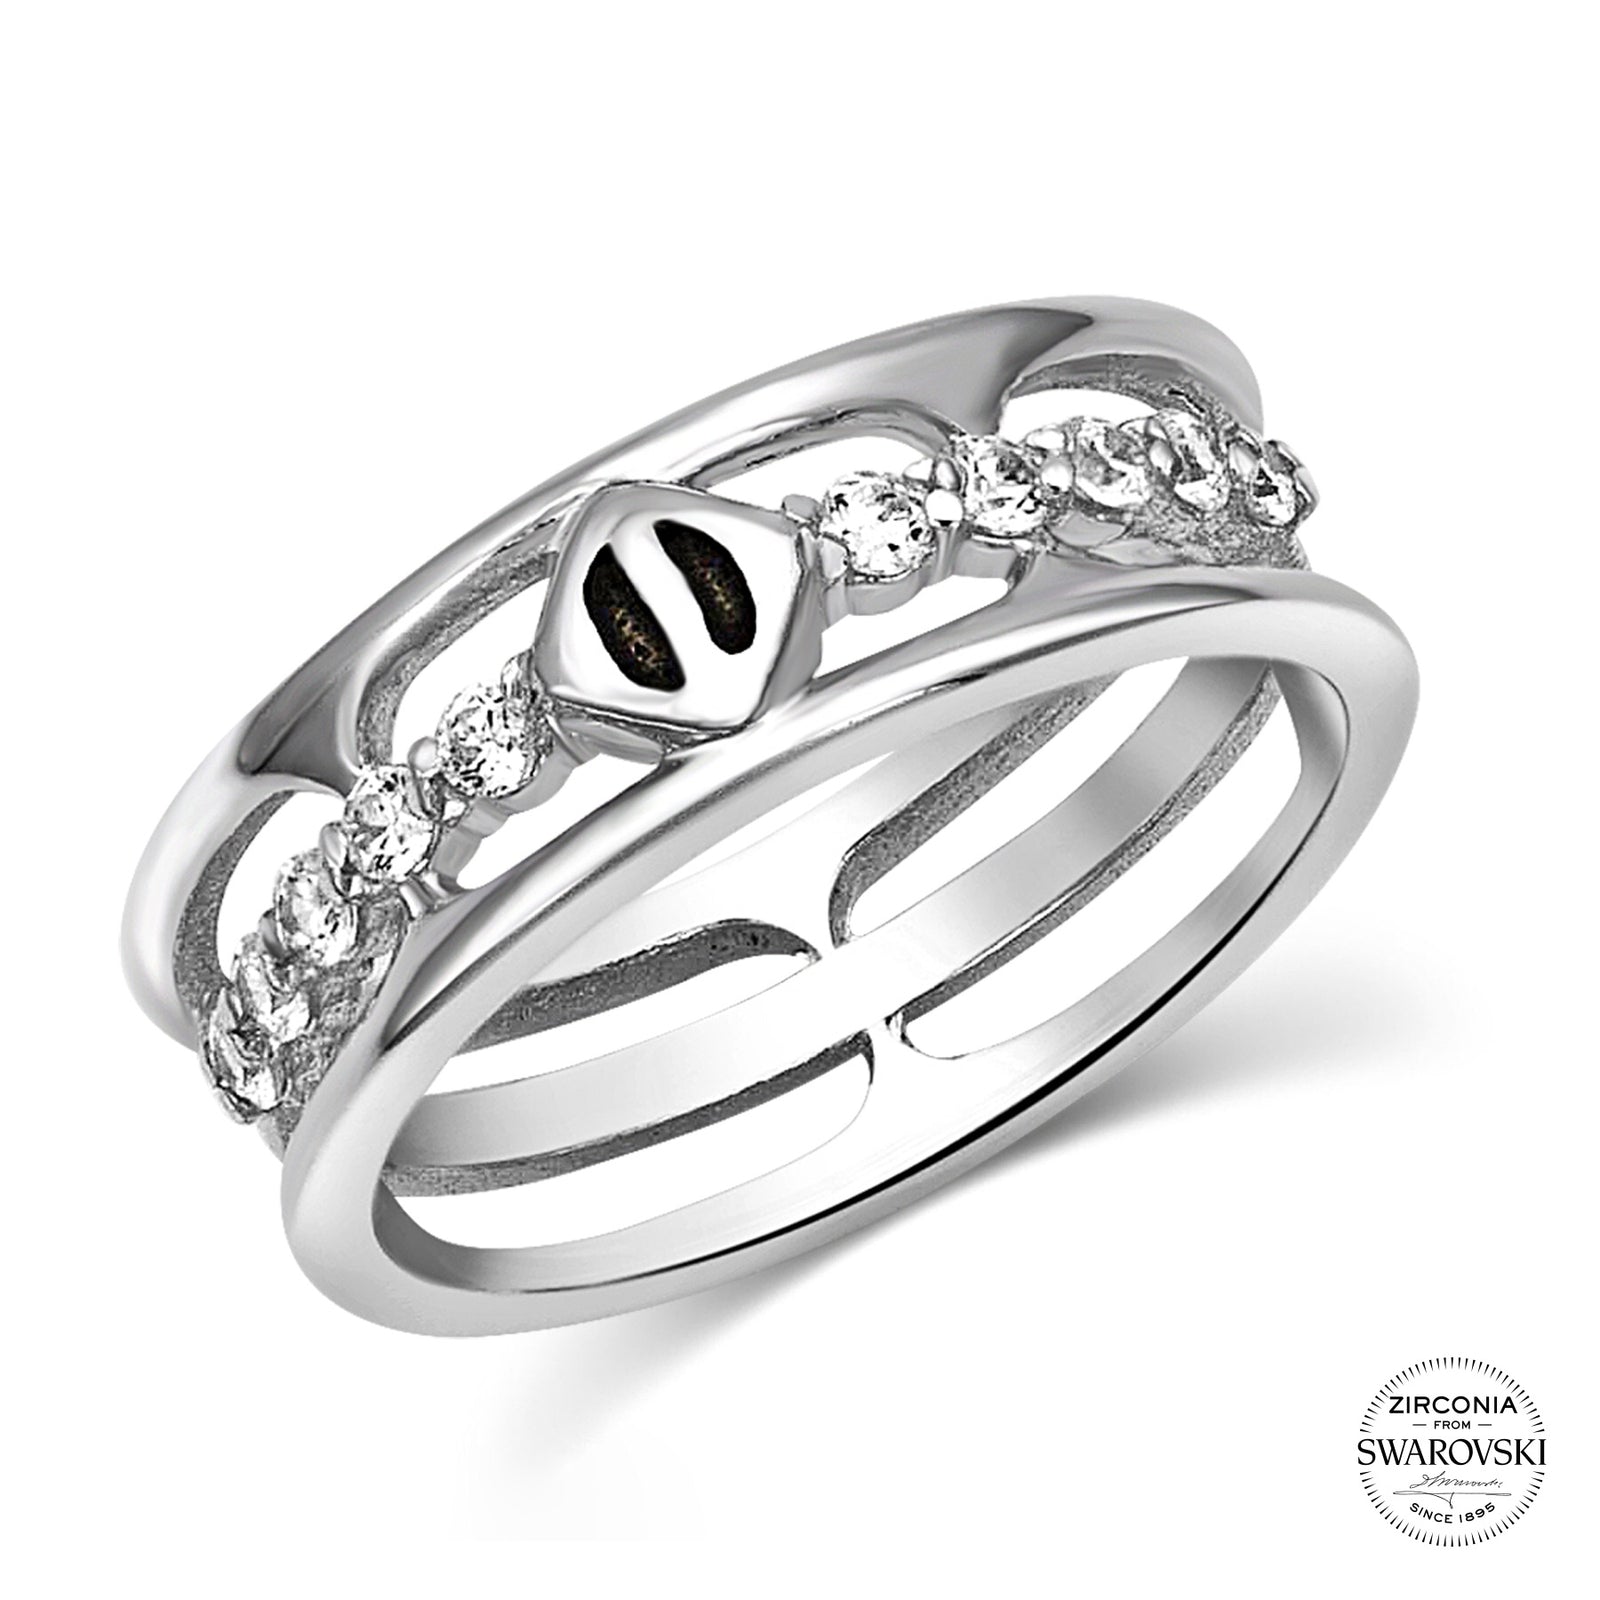 Pursue the Wild Sign of Attraction Ring